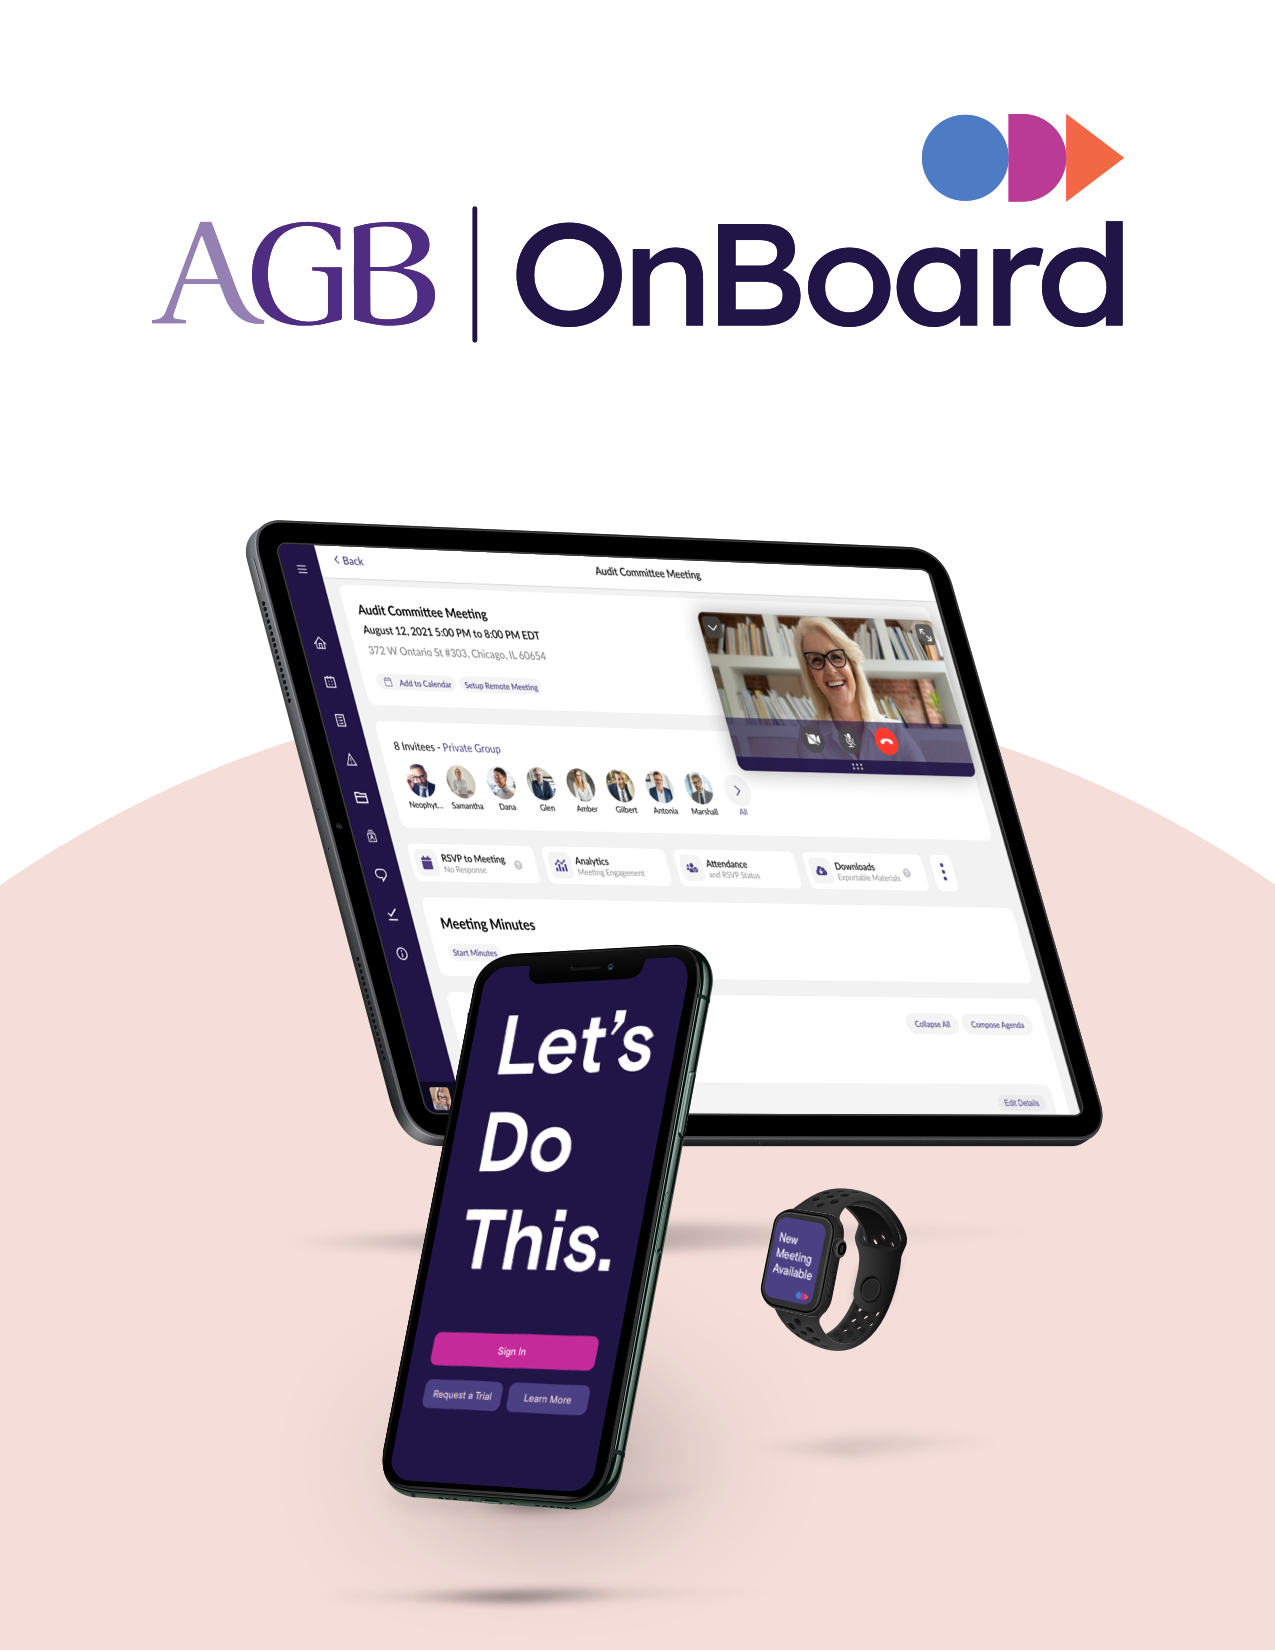 AGB OnBoard logo with image of tablet and mobile devices